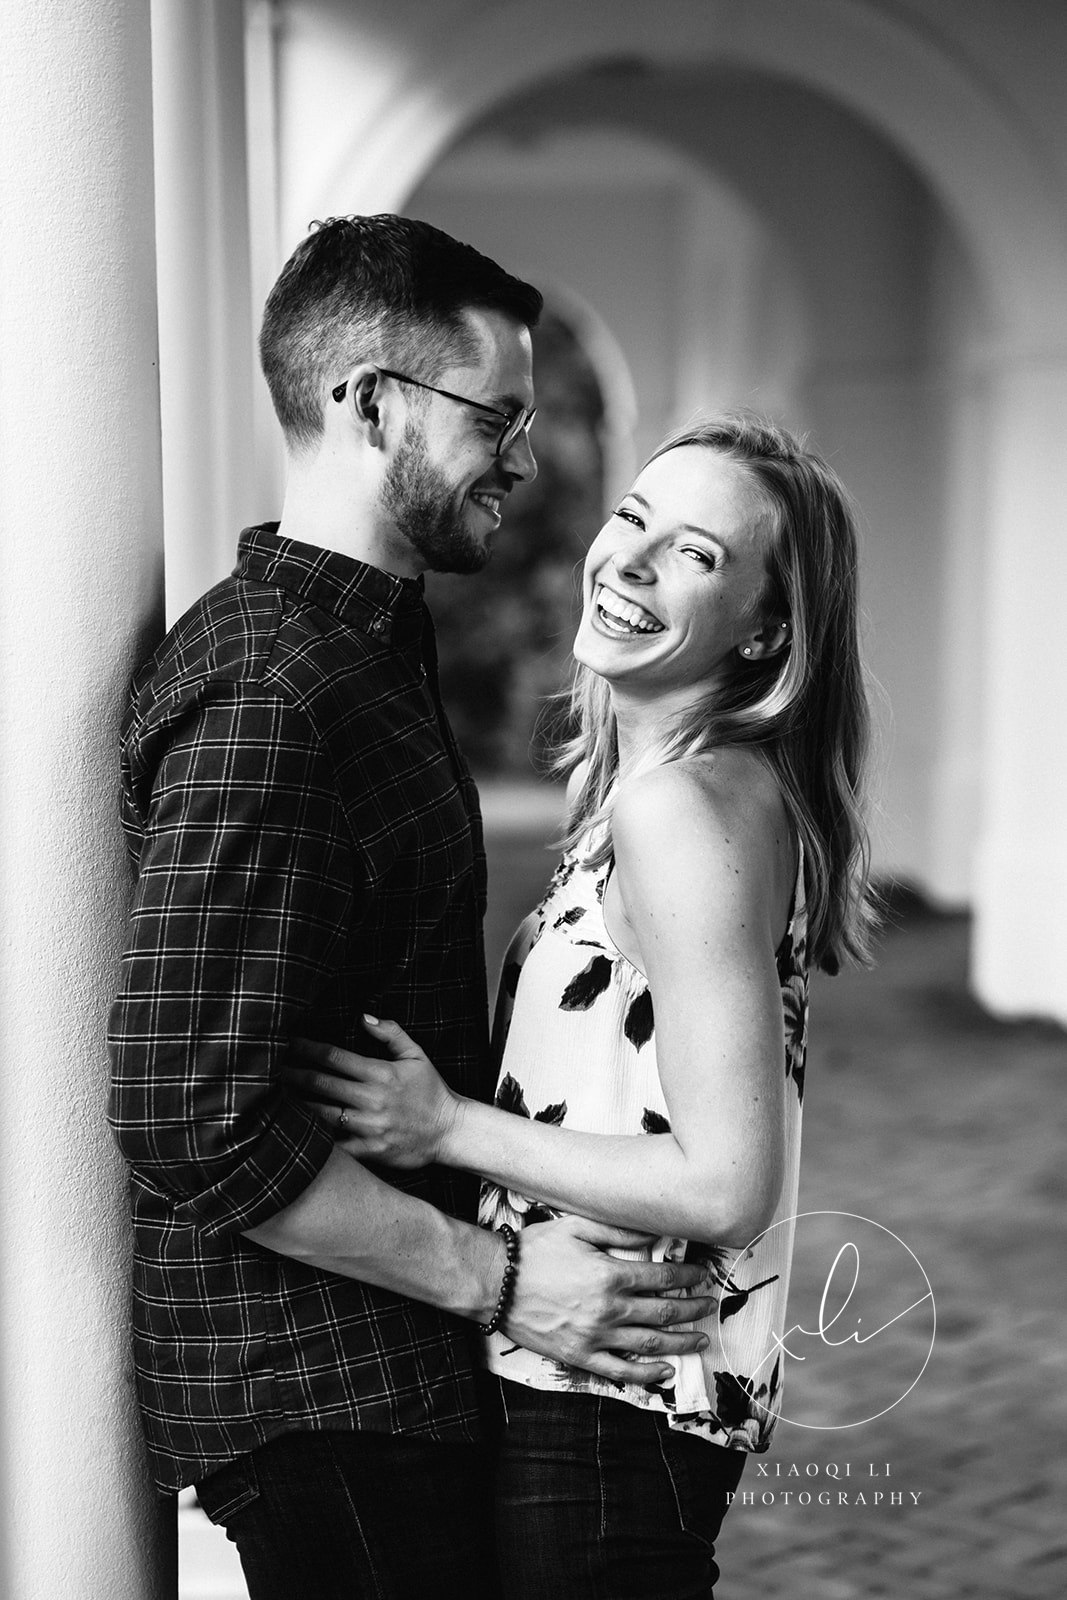 newly engaged couple leaning against wall laughing